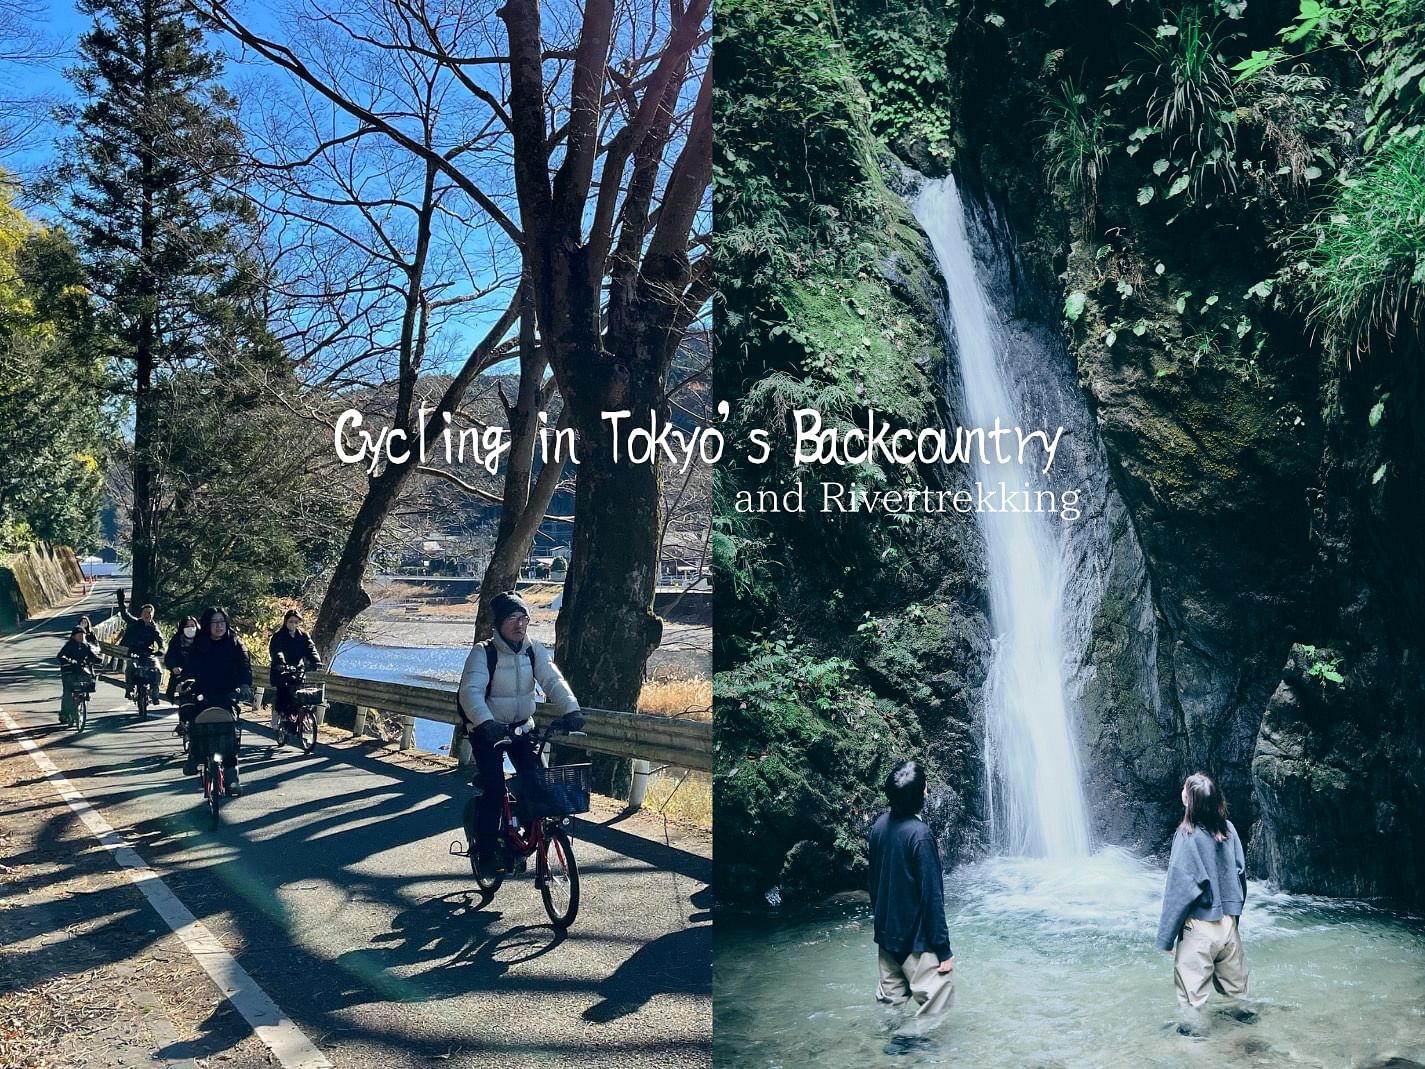 1 Day Tour in Tokyo Backcountry with E Bike Including River Trekking Adventure